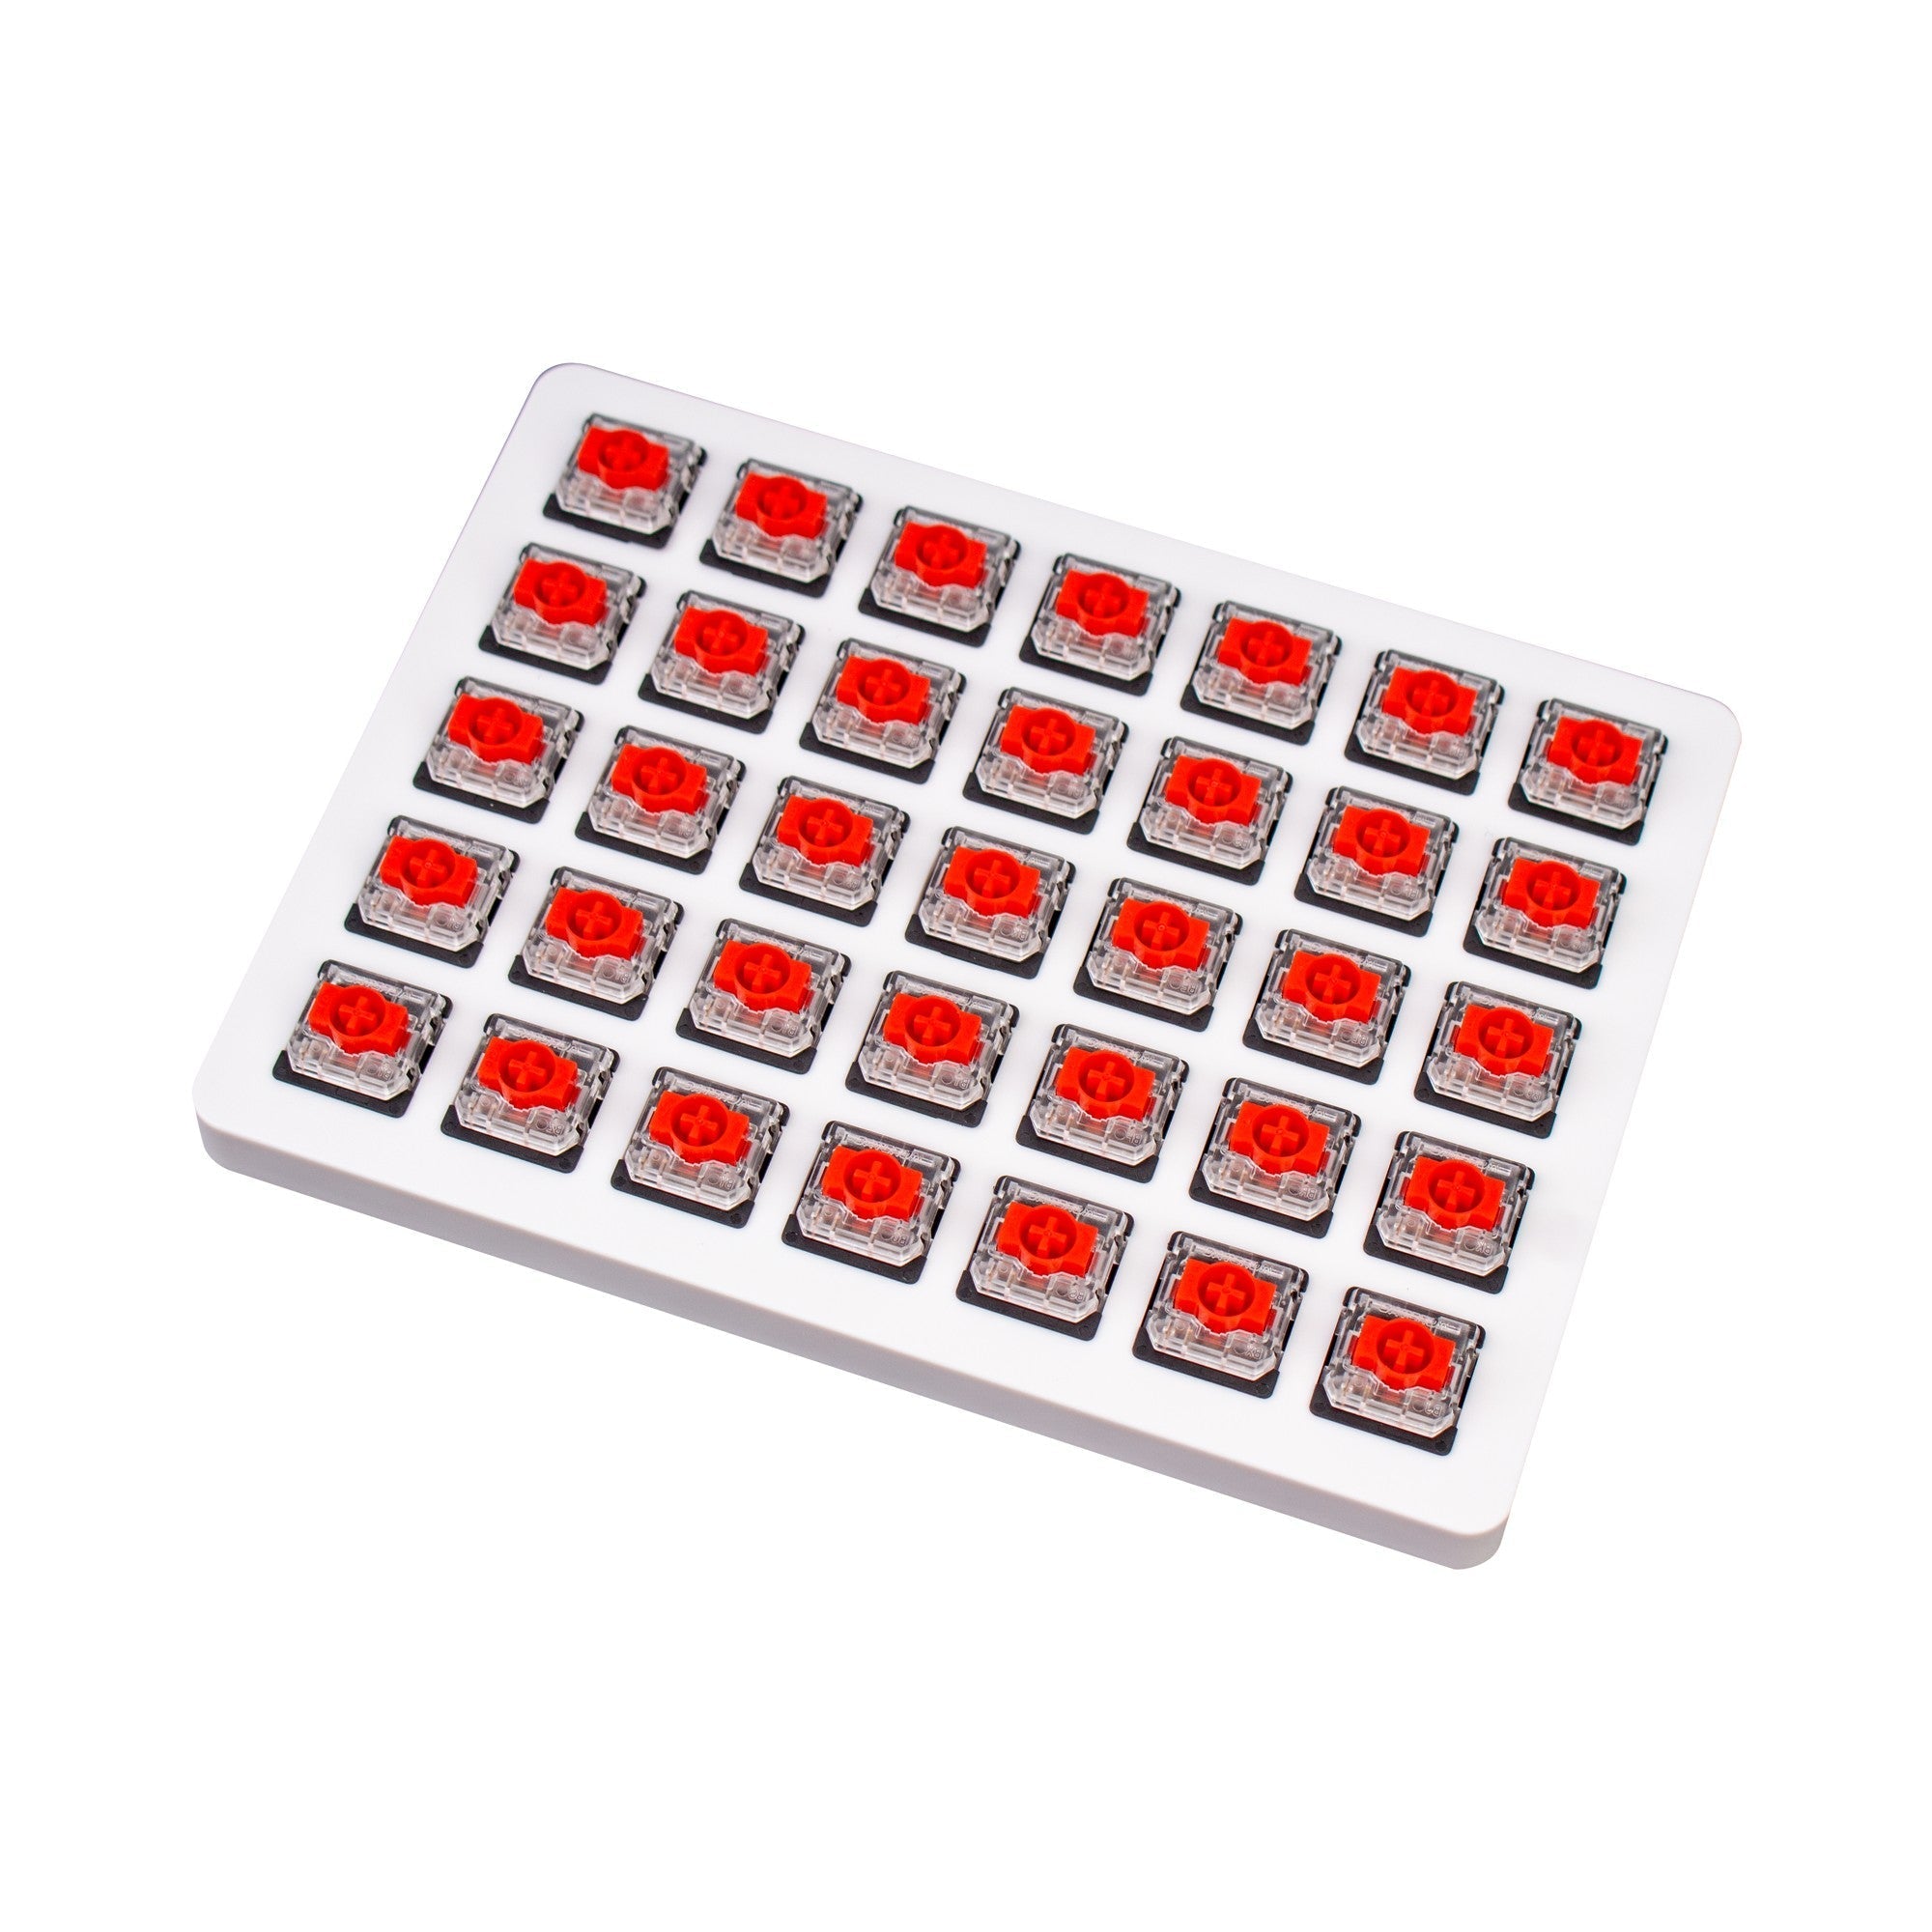 MX-style low-profile Gateron mechanical switch red